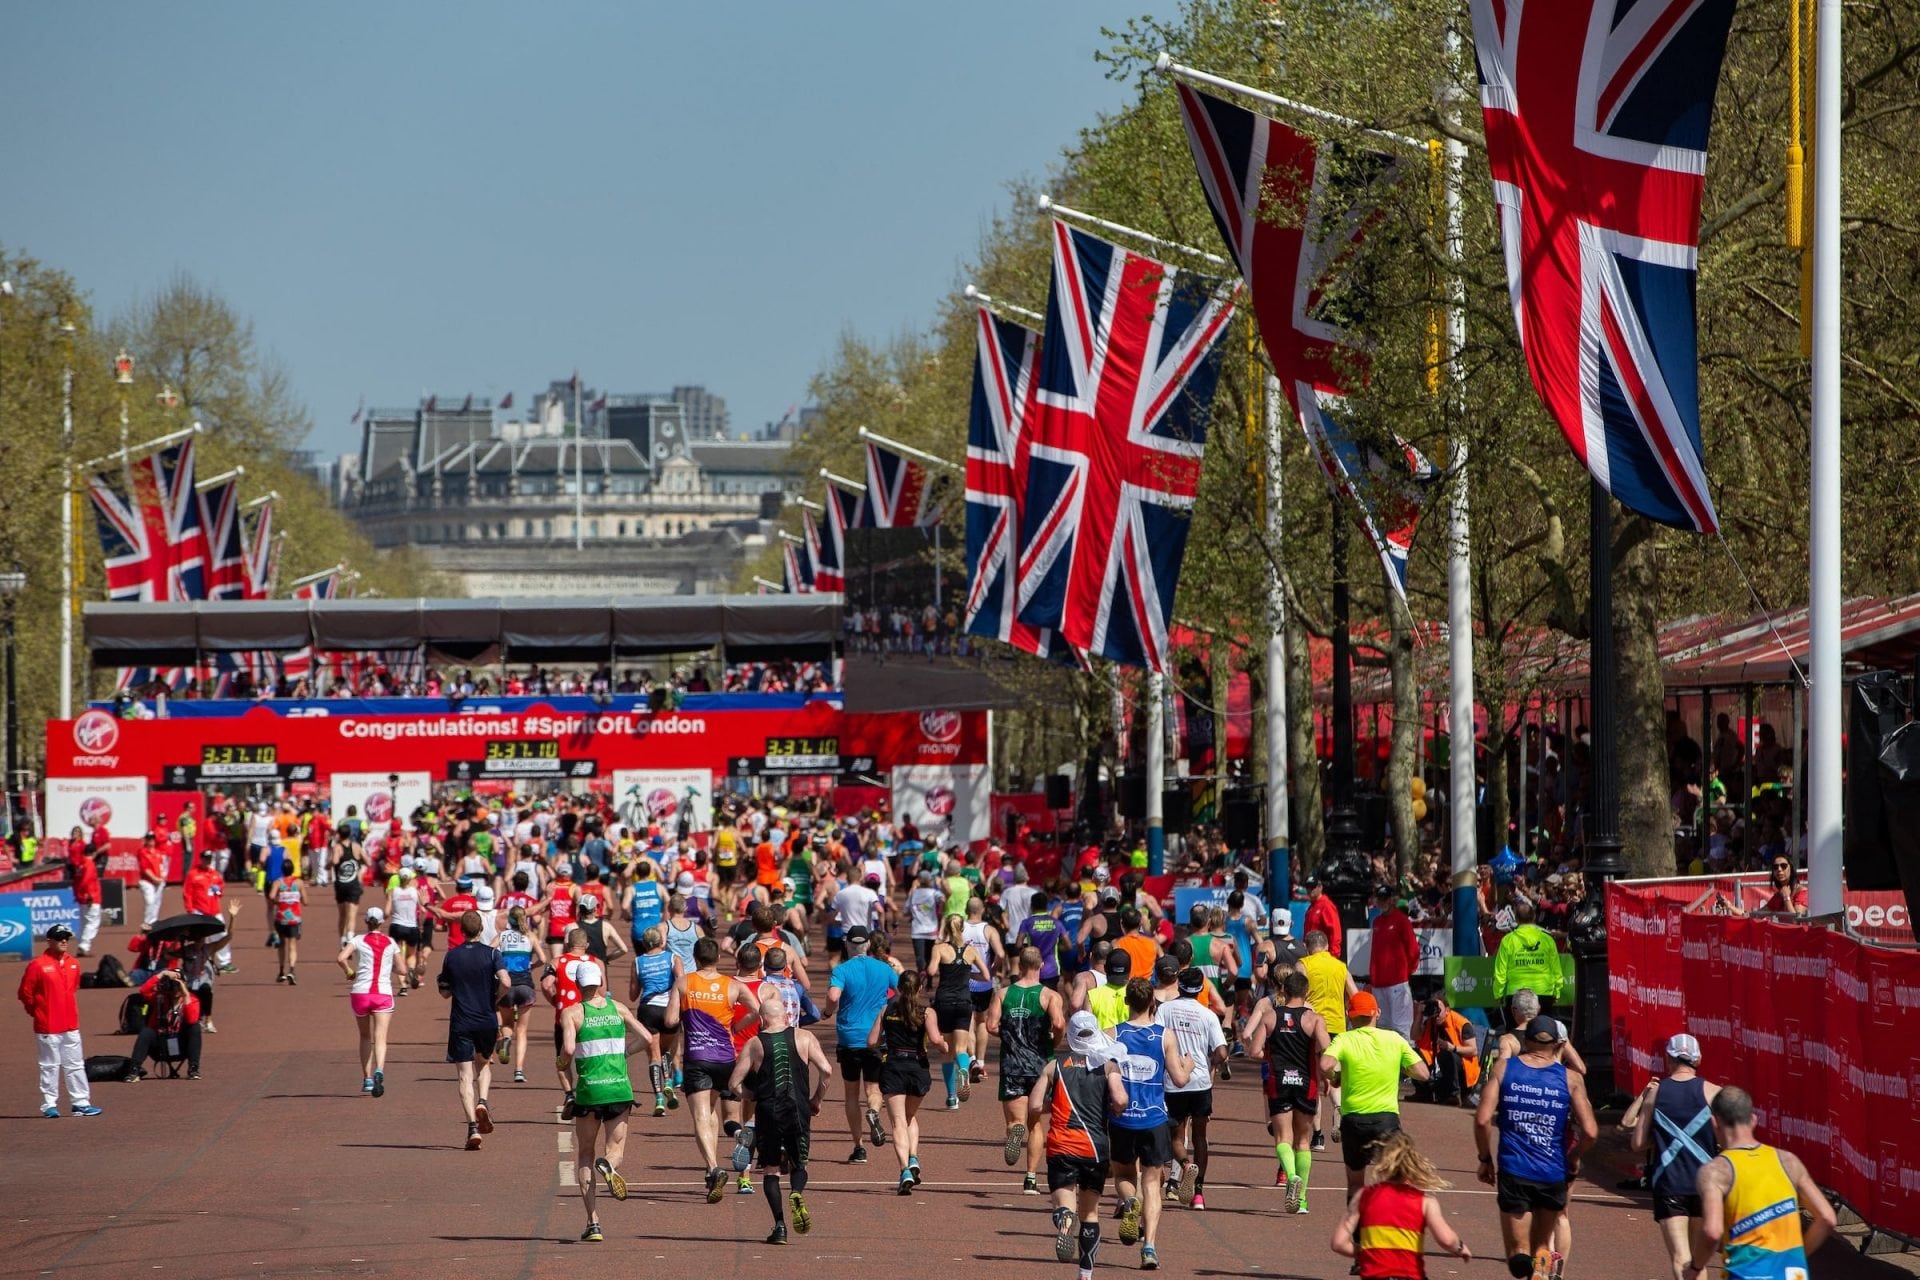 Thousands of runners taking part in London Marathon